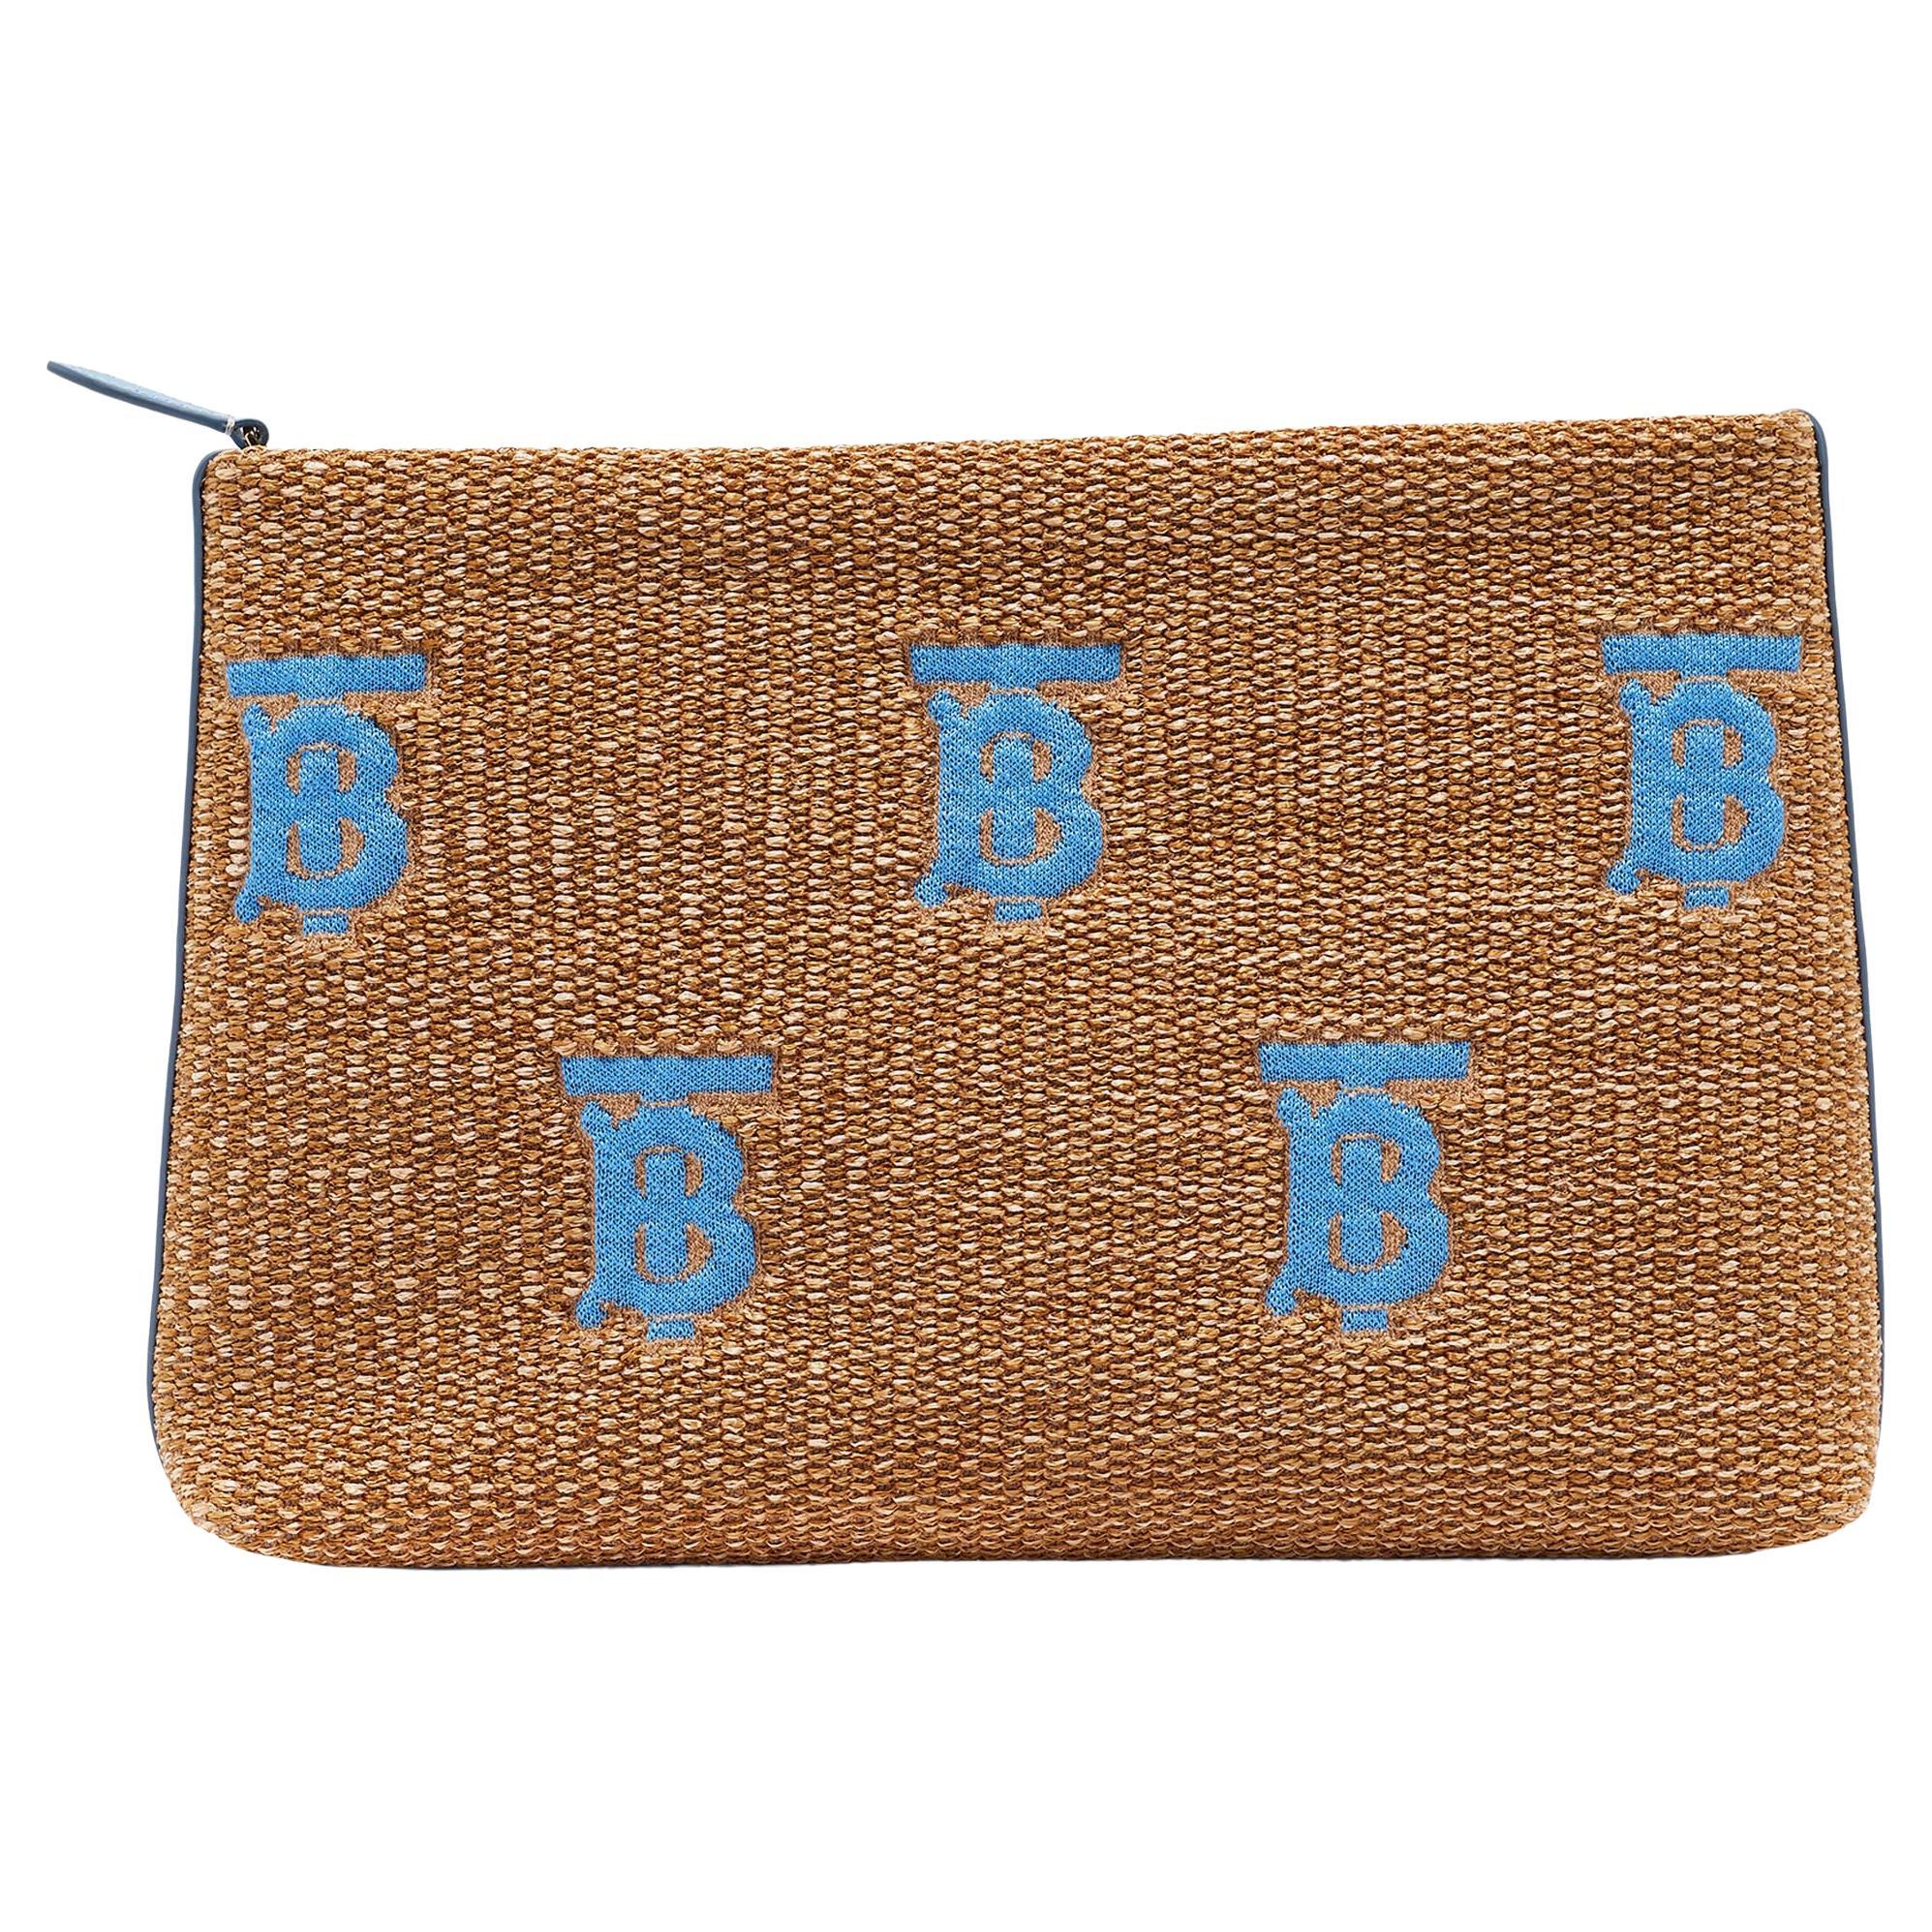 Burberry Beige/Blue Straw and Leather Duncan Clutch For Sale